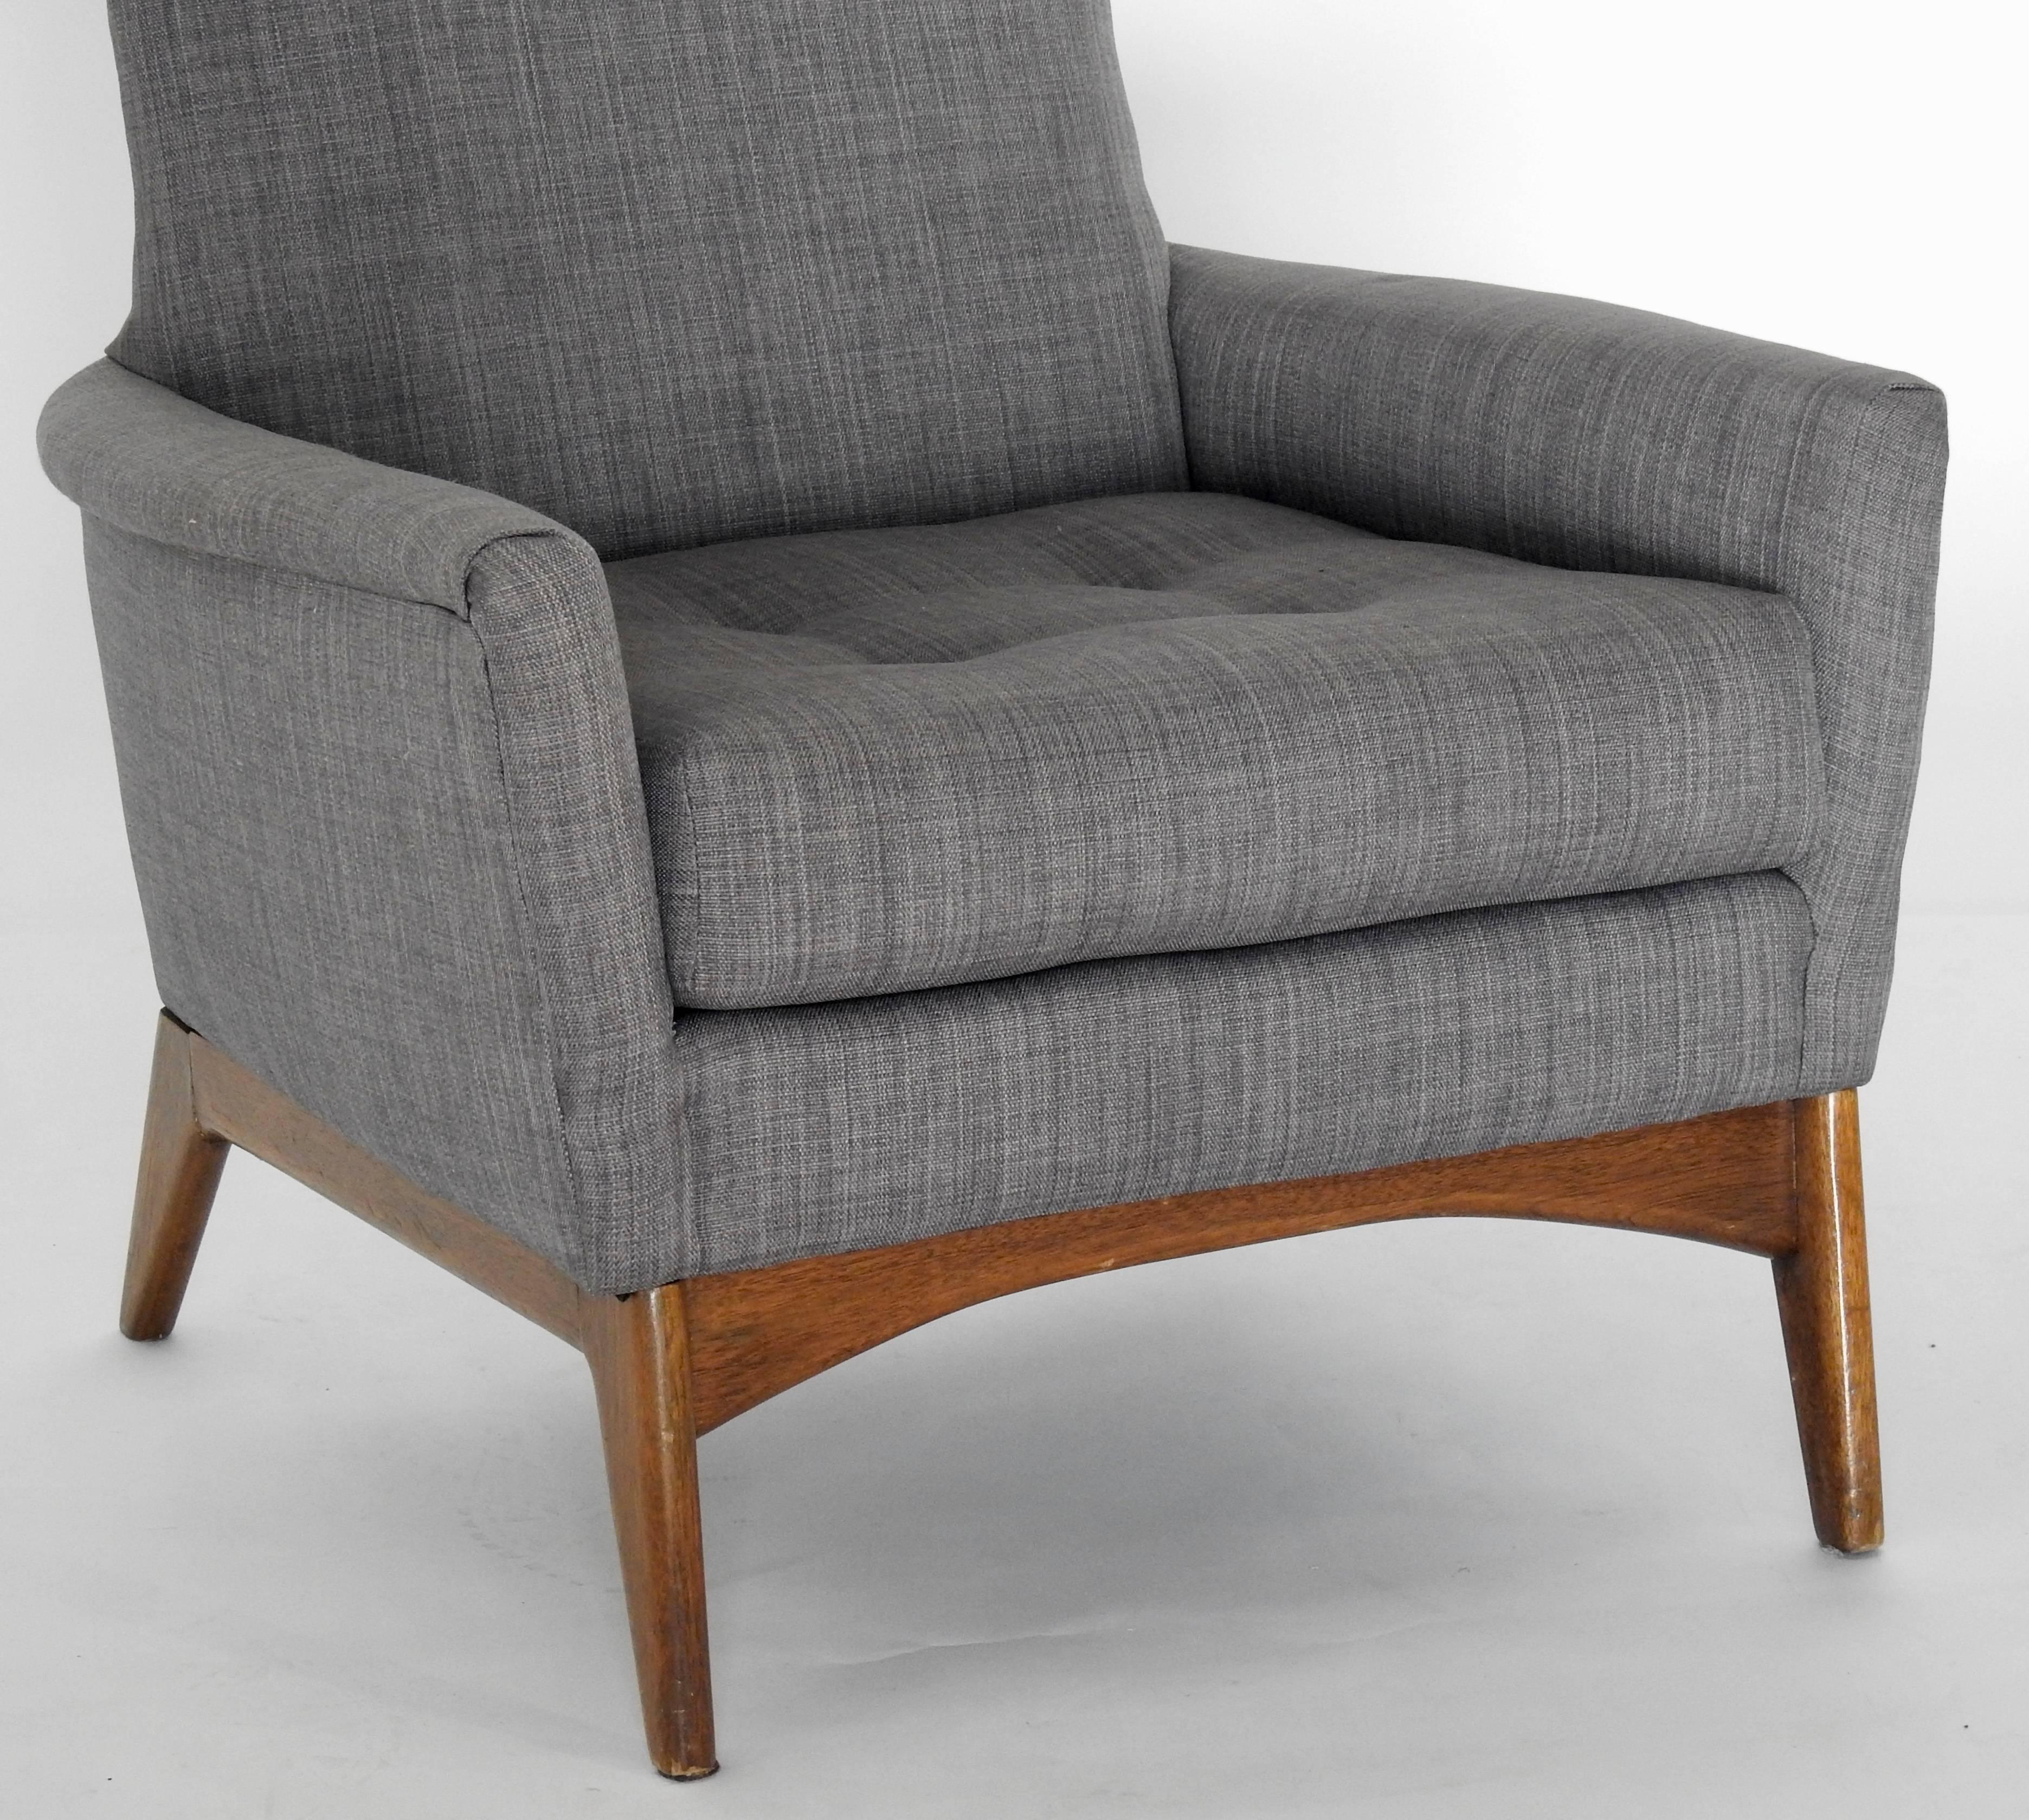 A mid-century high-back armchair by Adrian Pearsall. The chair has an angular form with a buttoned back and loose seat cushion. It is upholstered in a blue denim colored linen fabric. The walnut base features angled feet. Adrian Pearsall (1925-2011)